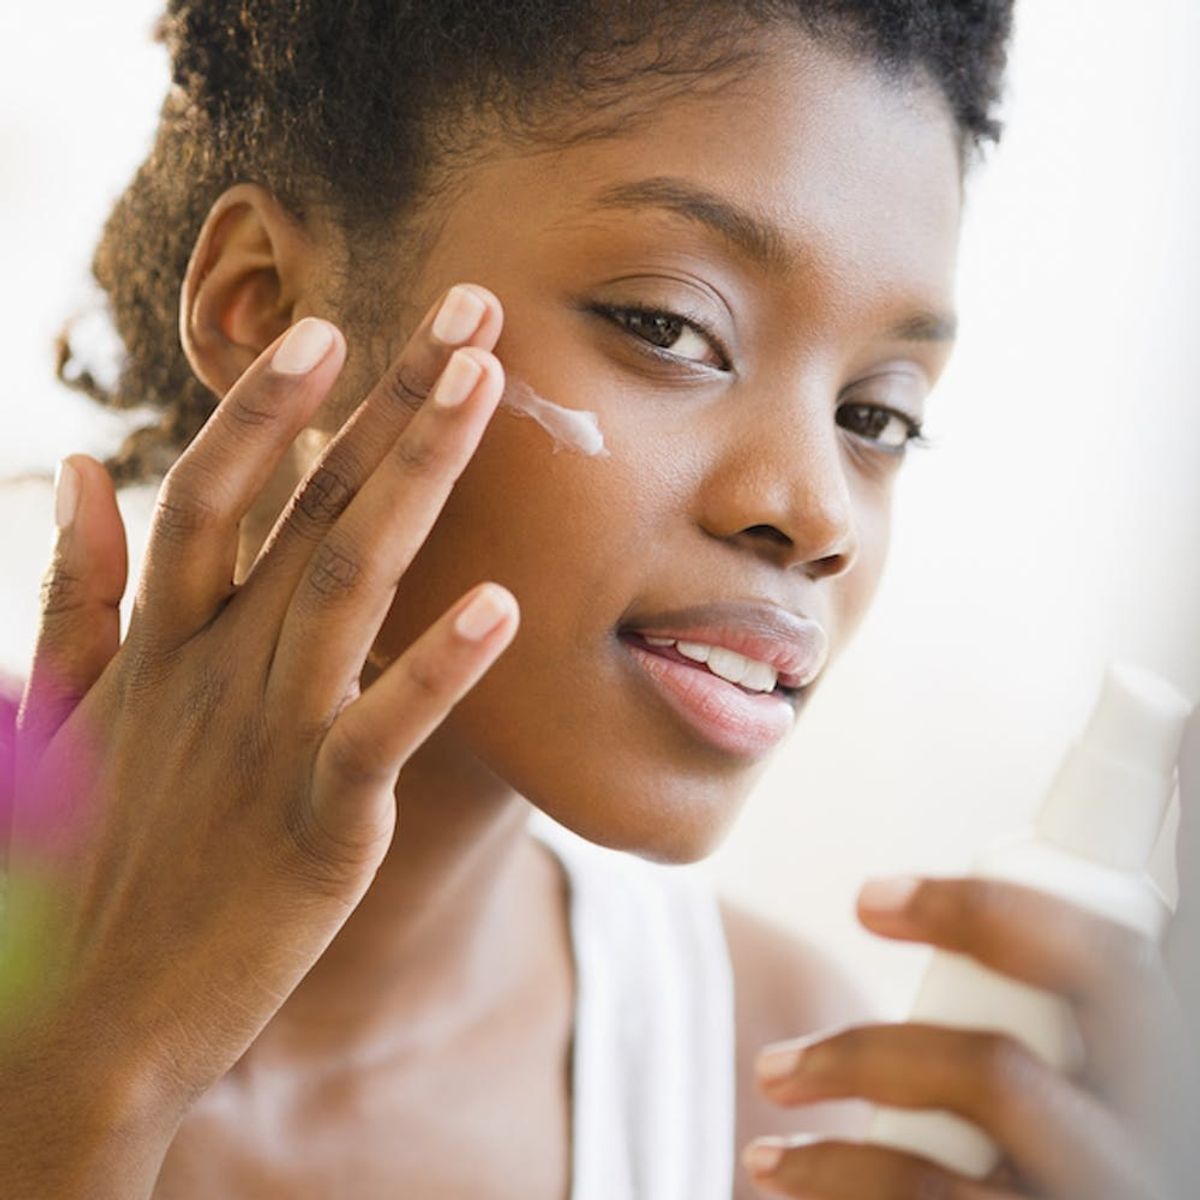 Everything You Know About Moisturizer Is a Lie